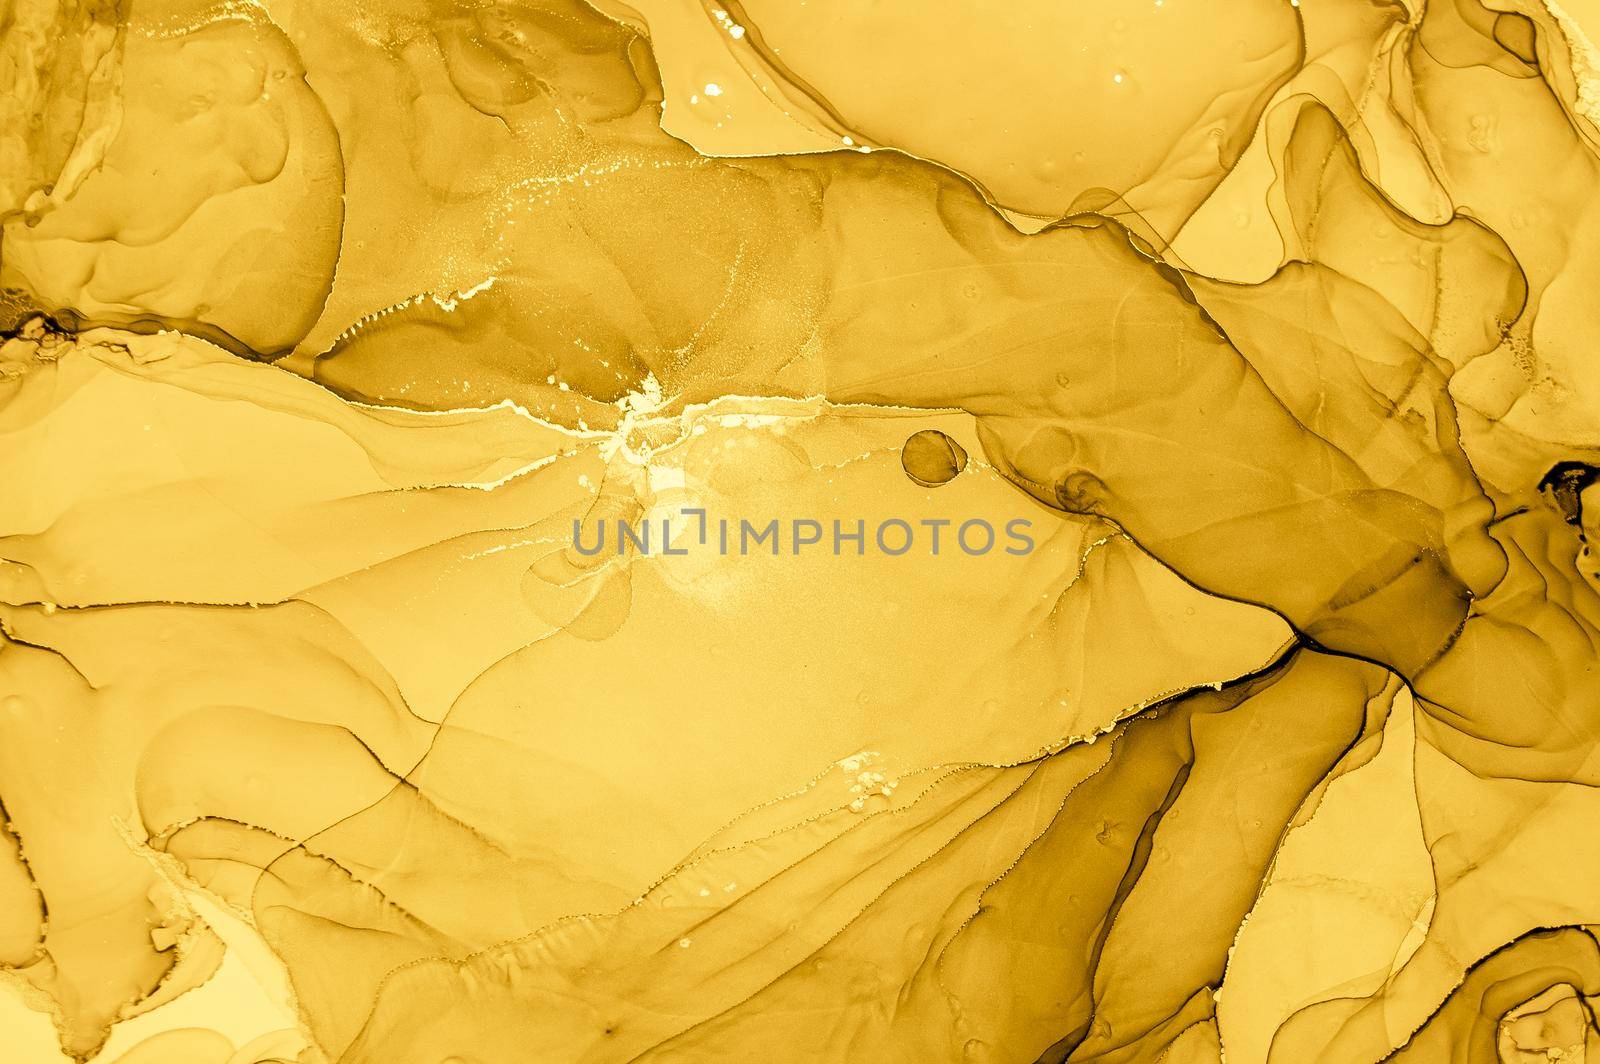 Gold Fluid Art. Abstract Liquid Wallpaper. Alcohol Ink Texture. Marble Effect. Fluid Art. Grunge Wave Background. Glitter Watercolor Wall. Yellow Acrylic Oil Illustration. Abstract Fluid Art.